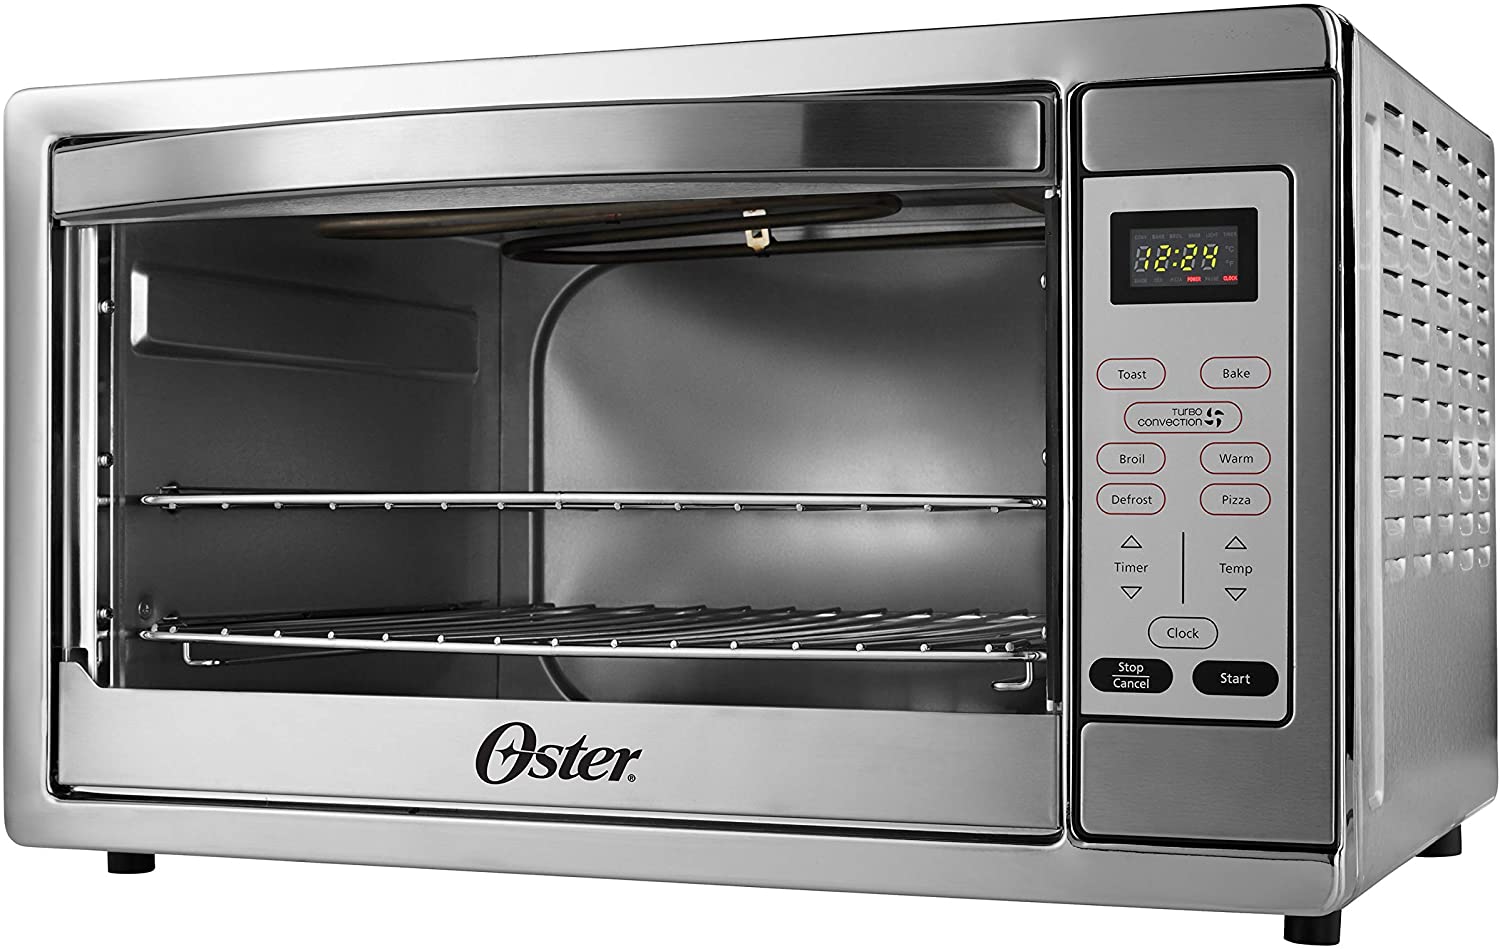 Oster Toaster Oven, 7-in-1 Countertop Toaster Oven, Fits 2 Large Pizzas, Stainless Steel